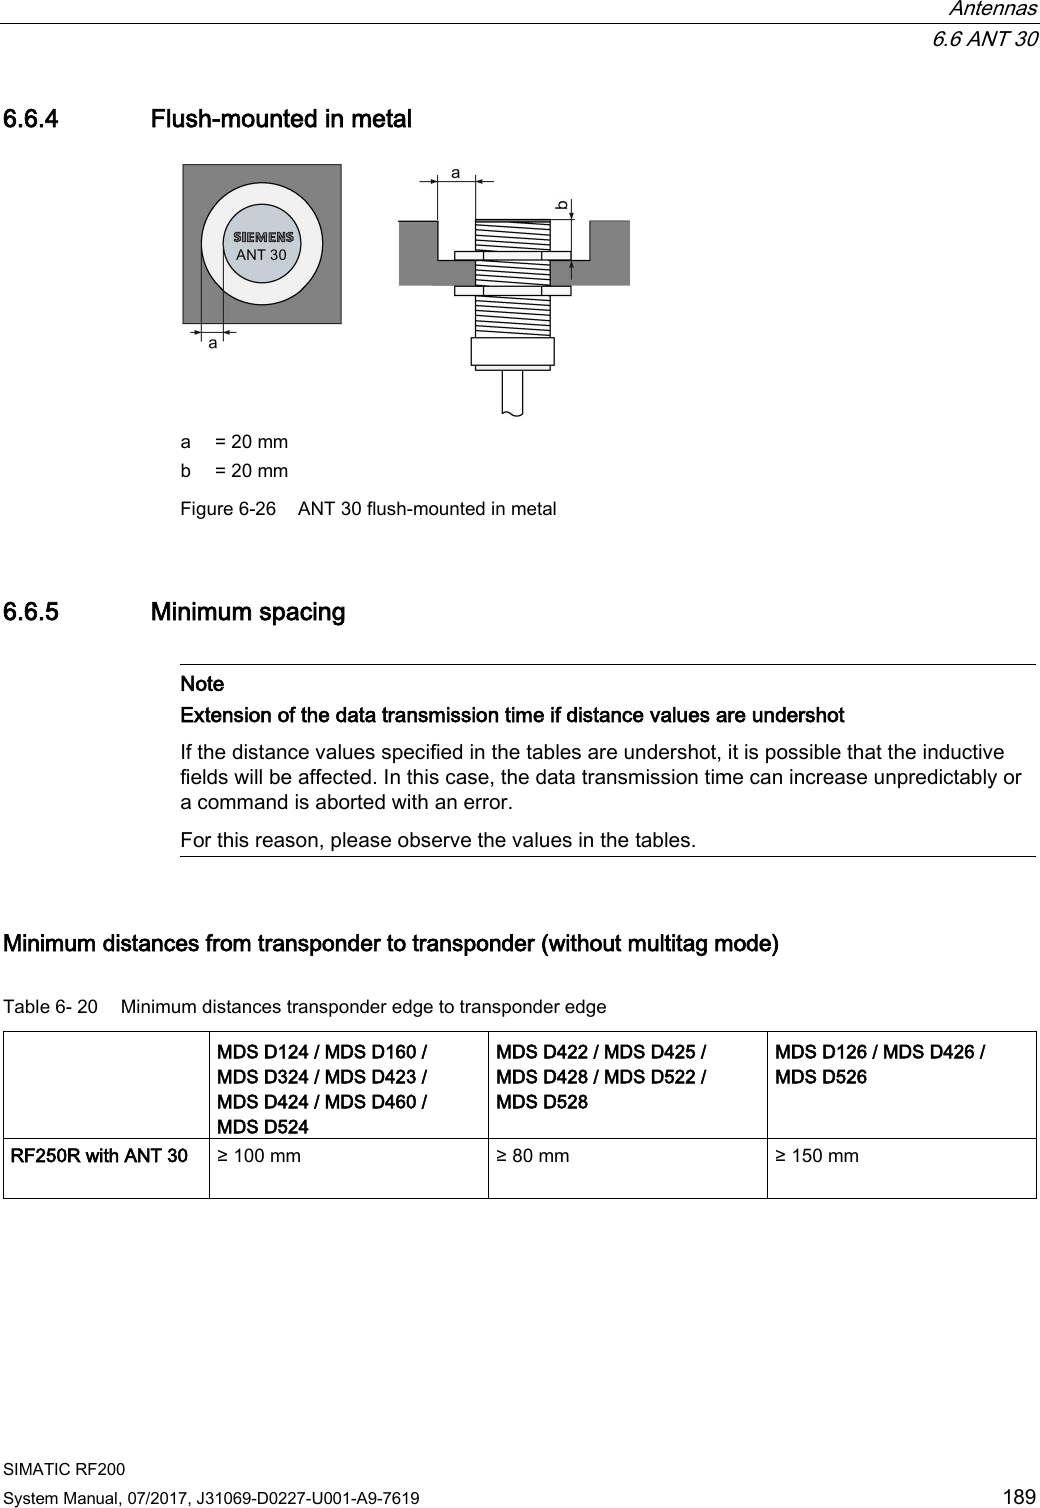  Antennas  6.6 ANT 30 SIMATIC RF200 System Manual, 07/2017, J31069-D0227-U001-A9-7619 189 6.6.4 Flush-mounted in metal  a = 20 mm b = 20 mm Figure 6-26 ANT 30 flush-mounted in metal 6.6.5 Minimum spacing   Note Extension of the data transmission time if distance values are undershot If the distance values specified in the tables are undershot, it is possible that the inductive fields will be affected. In this case, the data transmission time can increase unpredictably or a command is aborted with an error. For this reason, please observe the values in the tables.  Minimum distances from transponder to transponder (without multitag mode) Table 6- 20 Minimum distances transponder edge to transponder edge  MDS D124 / MDS D160 /  MDS D324 / MDS D423 /  MDS D424 / MDS D460 / MDS D524 MDS D422 / MDS D425 /  MDS D428 / MDS D522 / MDS D528 MDS D126 / MDS D426 / MDS D526 RF250R with ANT 30  ≥ 100 mm ≥ 80 mm ≥ 150 mm 